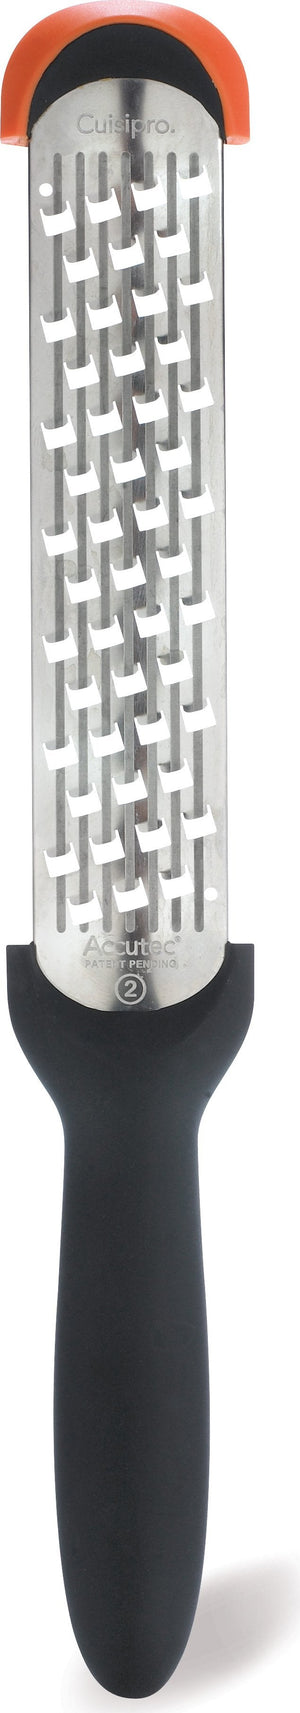 Cuisipro - 11.5" SGT Coarse Rasp Grater - 747162